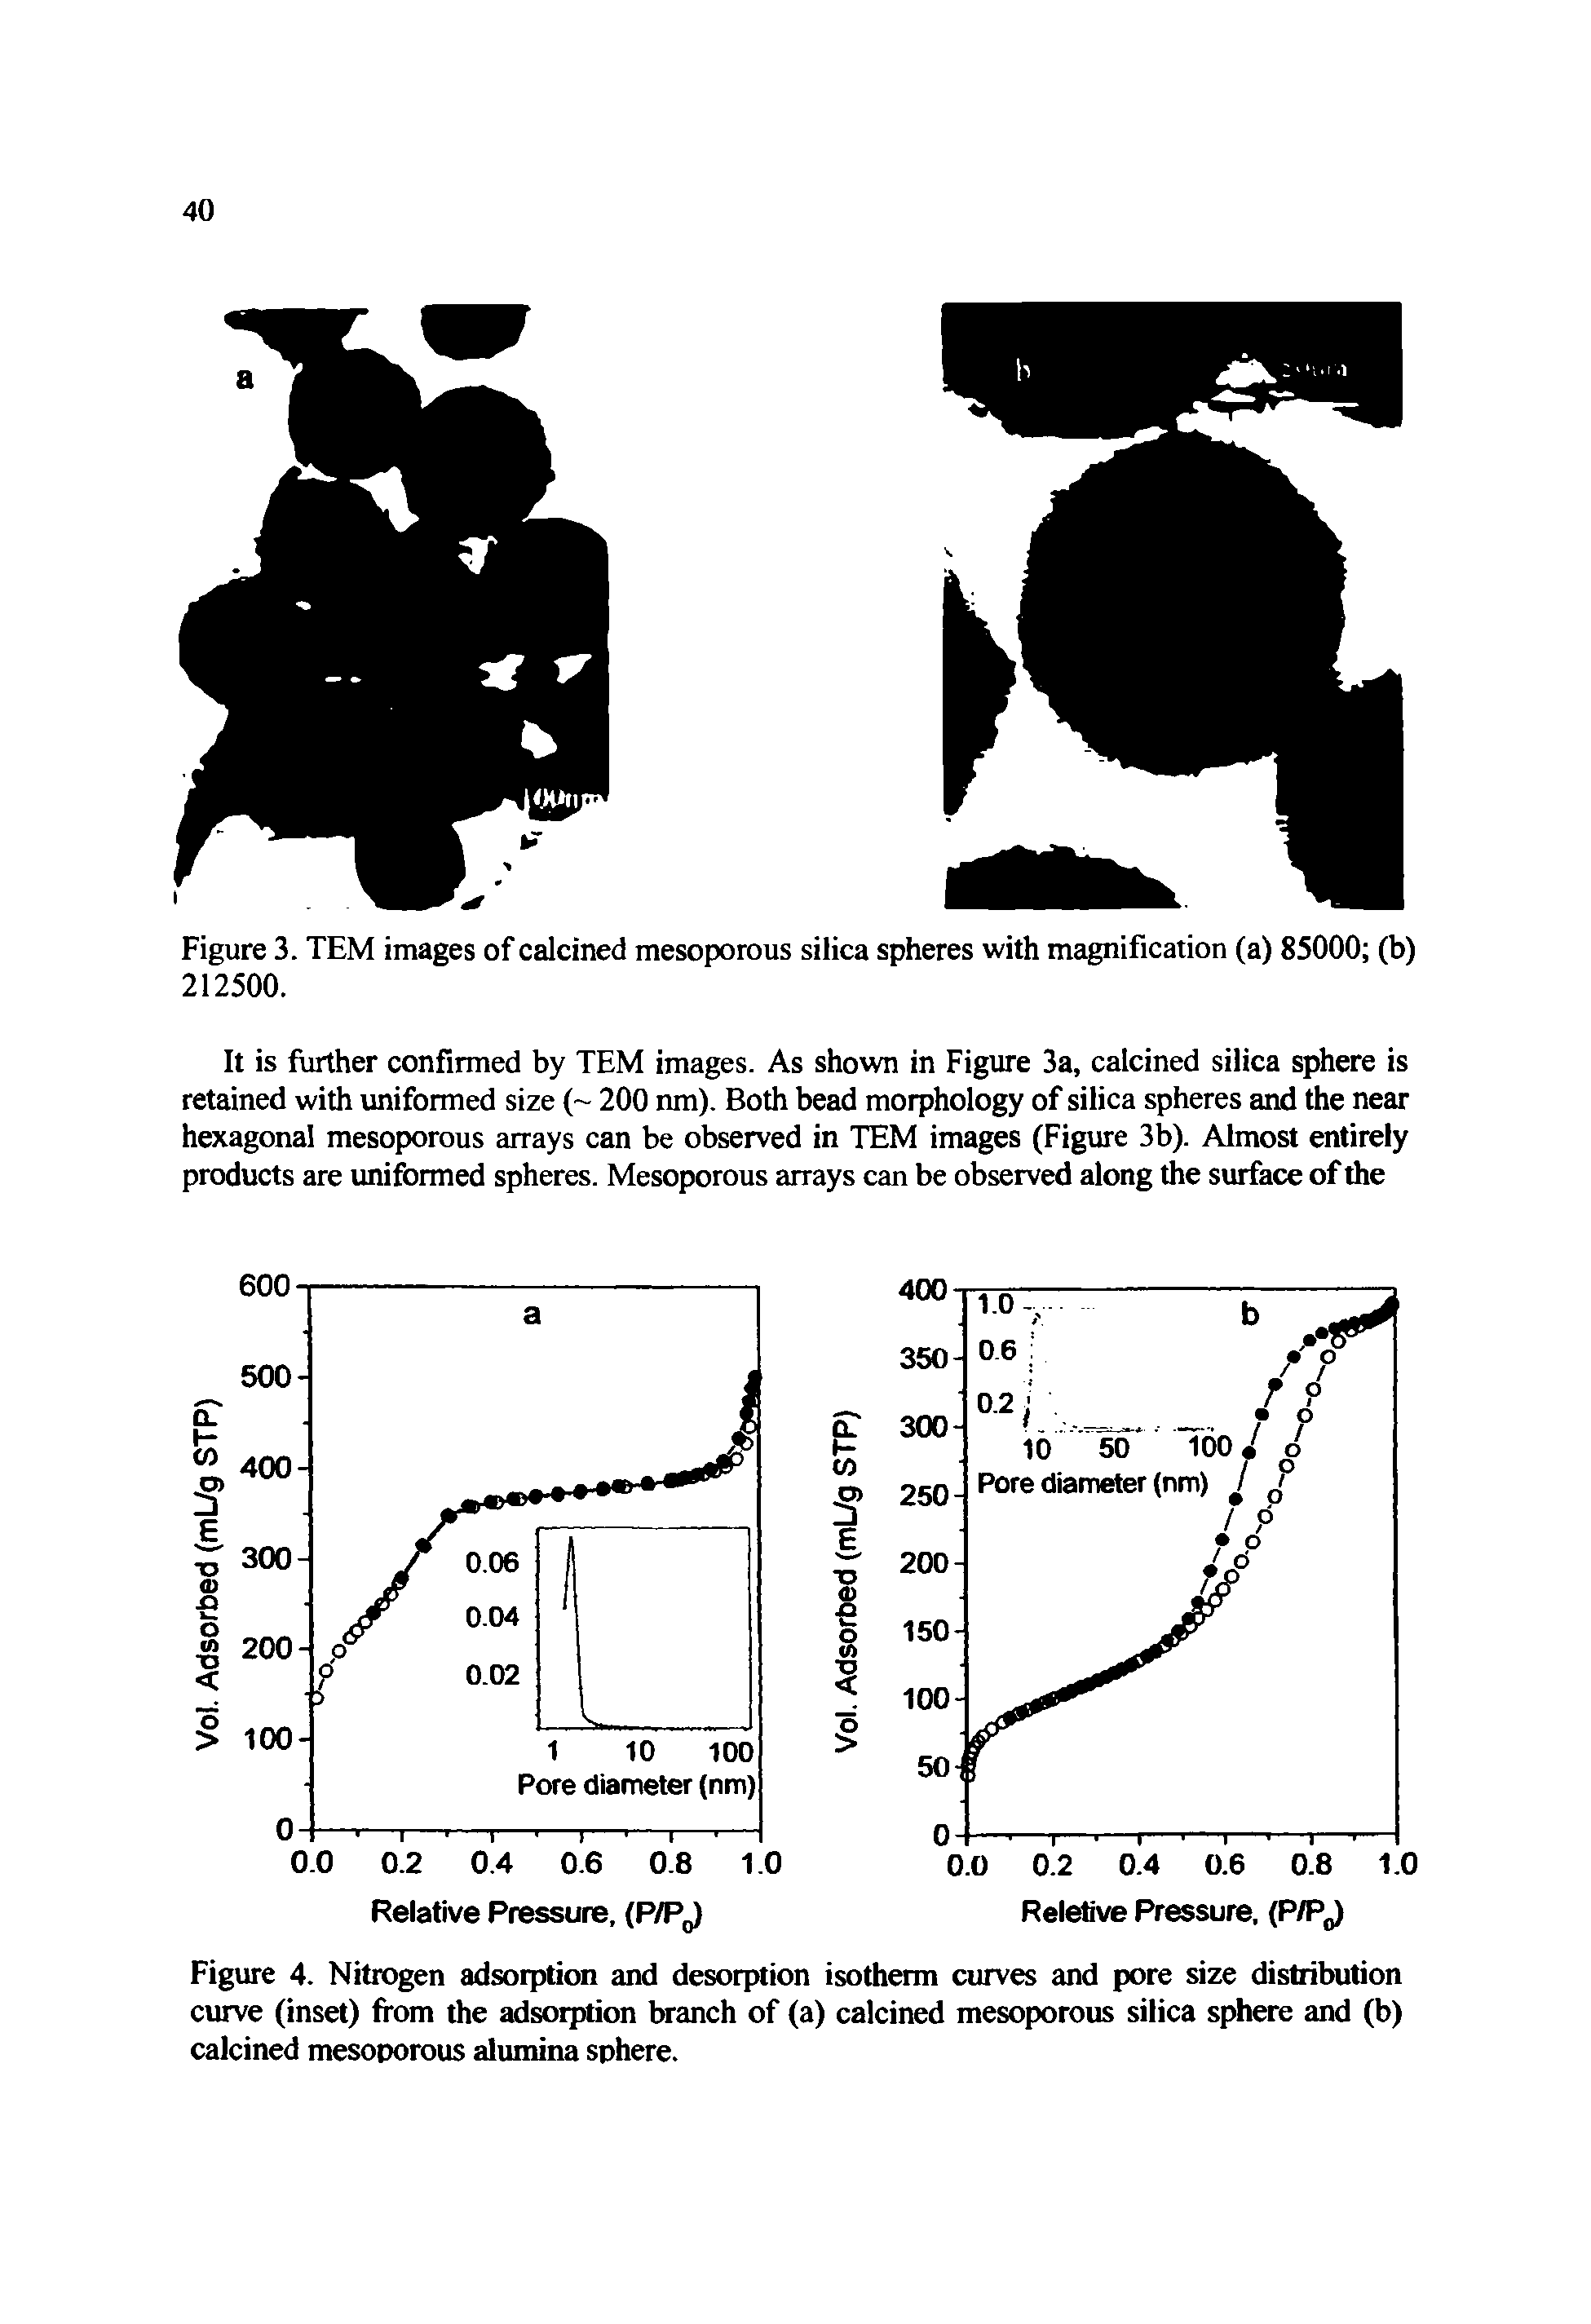 Figure 4. Nitrogen adsorption and desorption isotherm curves and pore size distribution curve (inset) from the adsorption branch of (a) calcined mesoporous silica sphere and (b) calcined mesoporous alumina sphere.